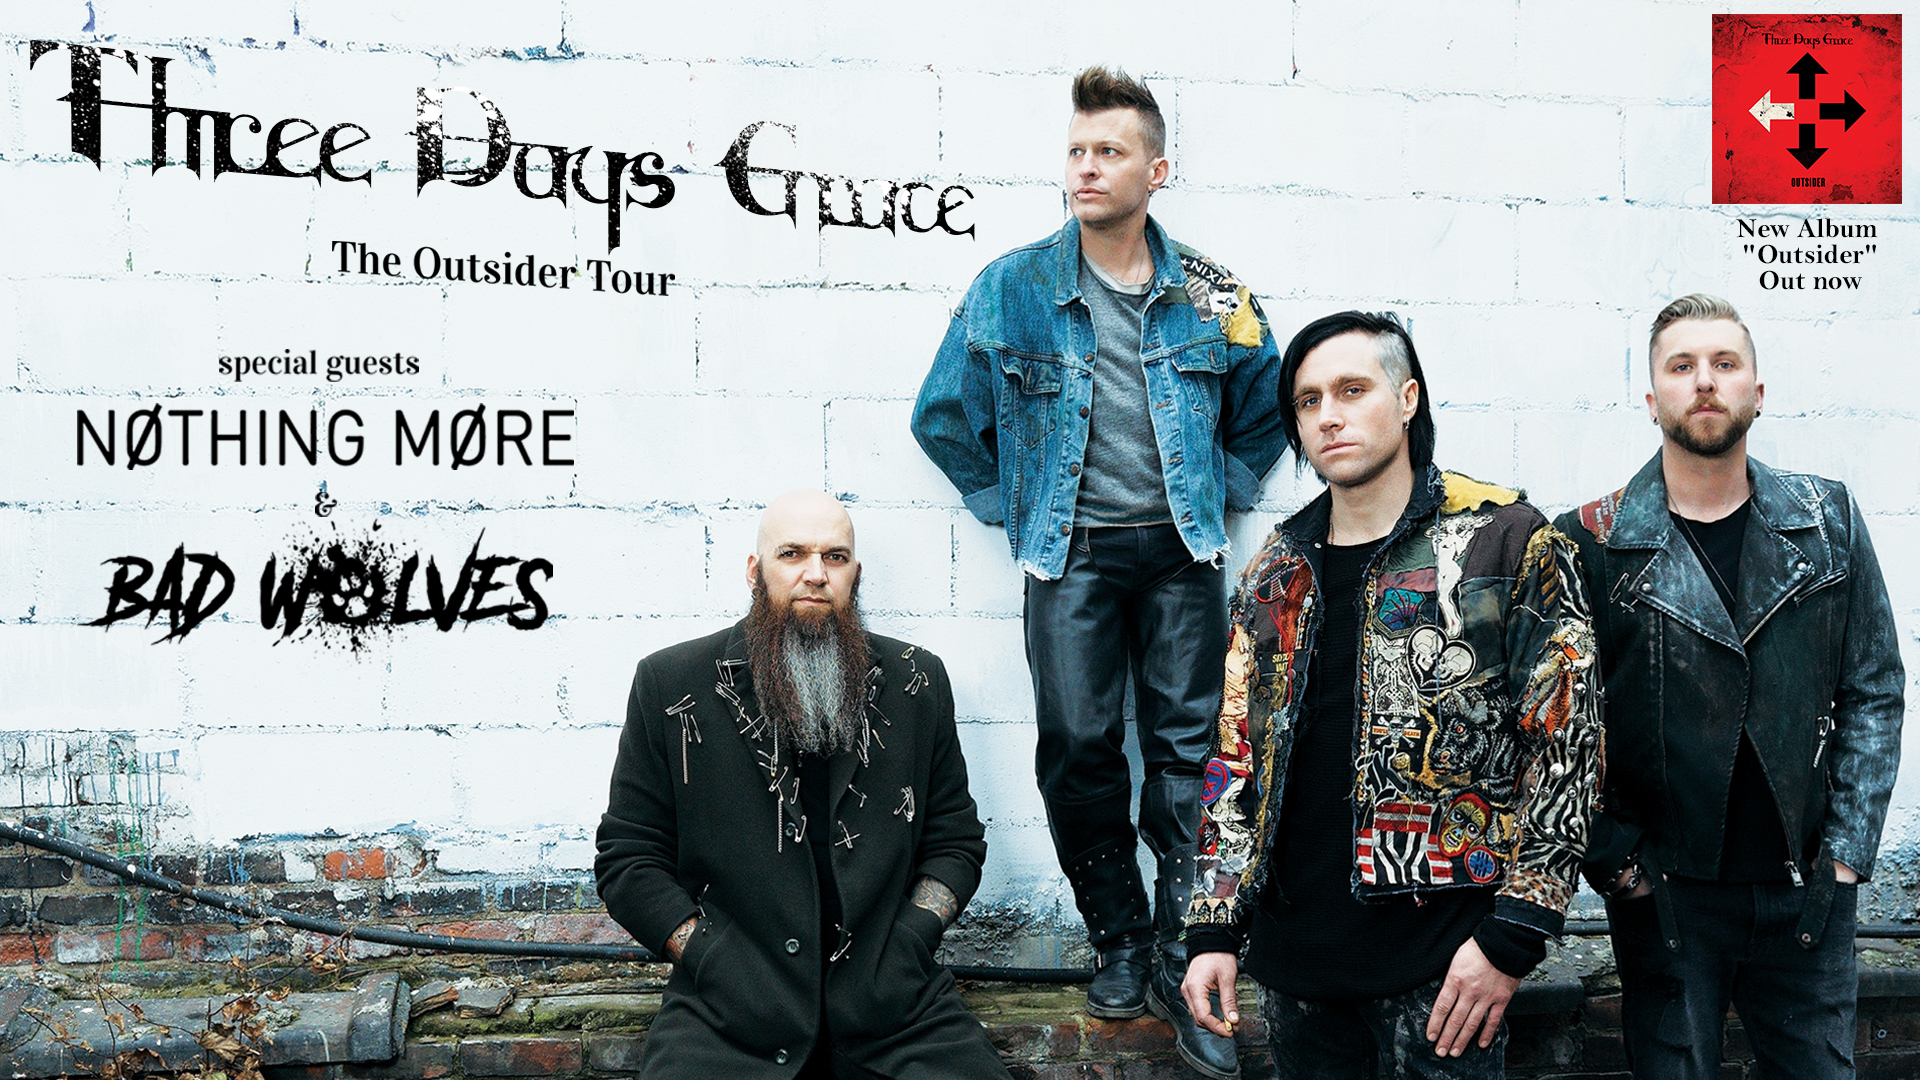 Three Days Grace The Outsider Tour with special guests Nothing More and Bad Wolves at the SOEC in Penticton on Saturday, December 15